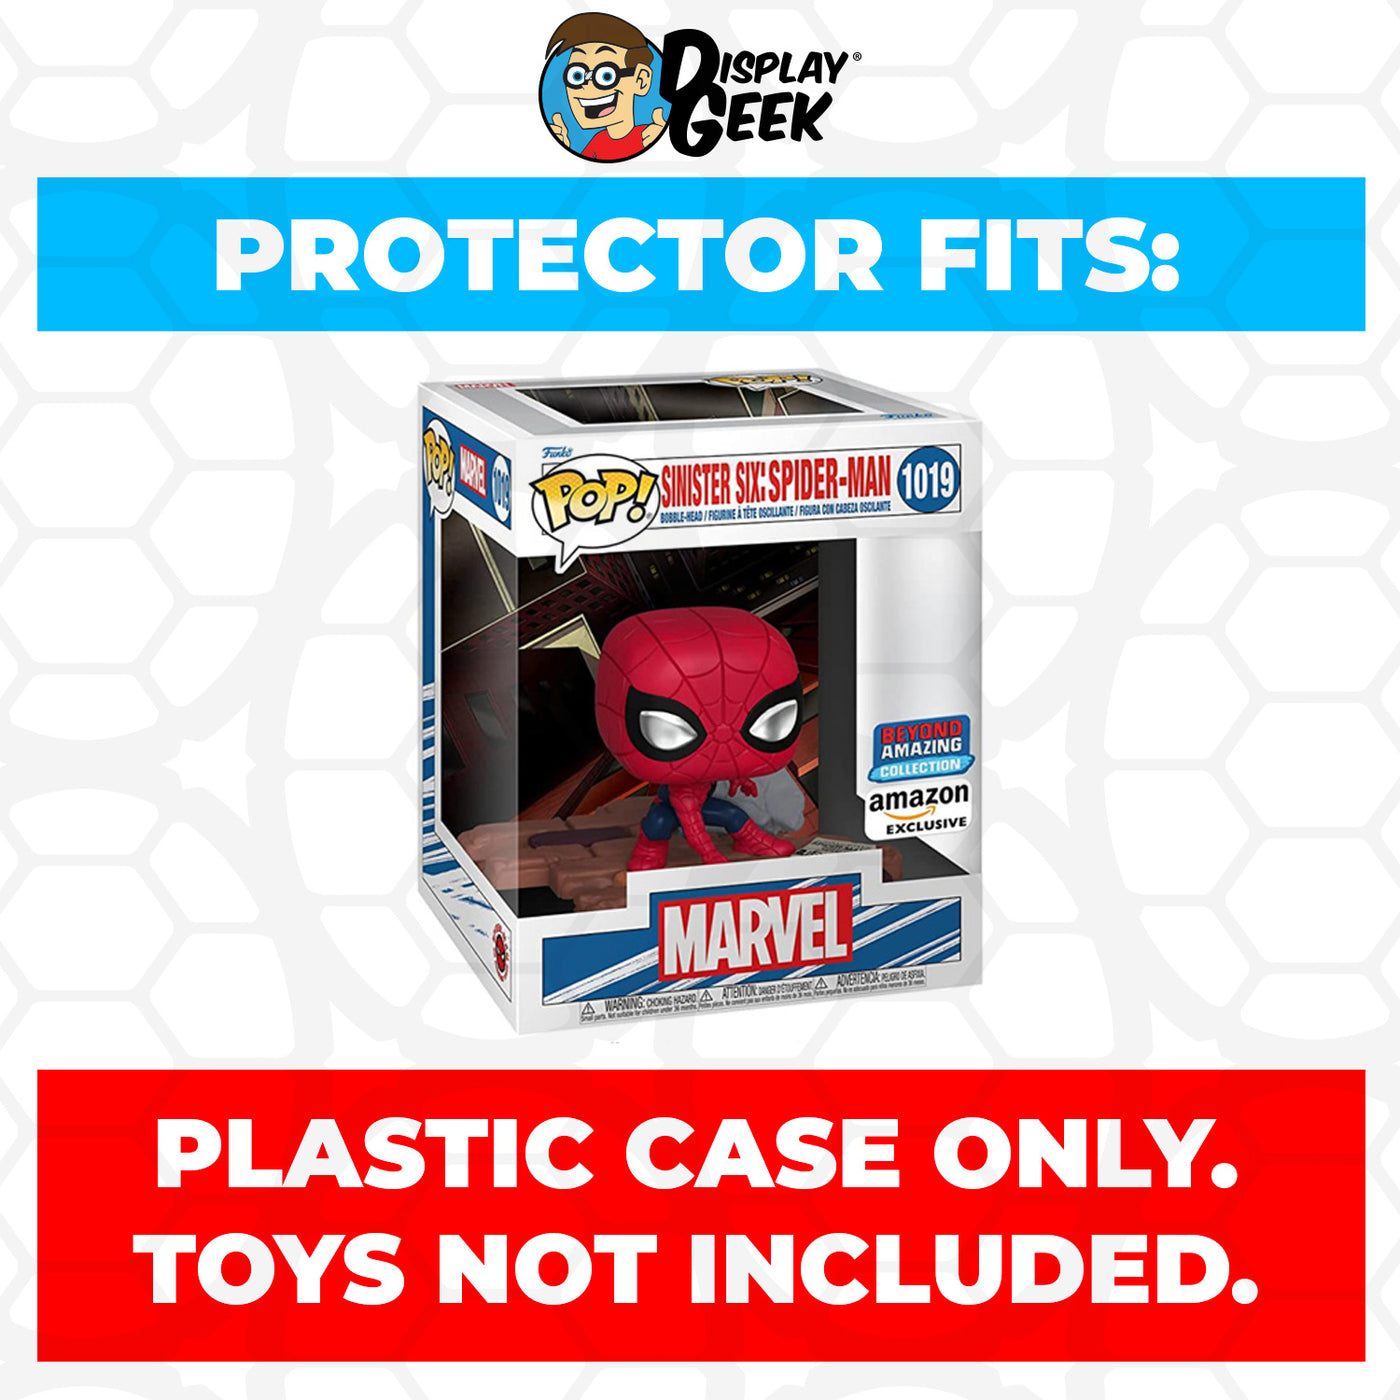 Pop Protector for Sinister Six Spider-Man #1019 Funko Pop Deluxe on The Protector Guide App by Display Geek